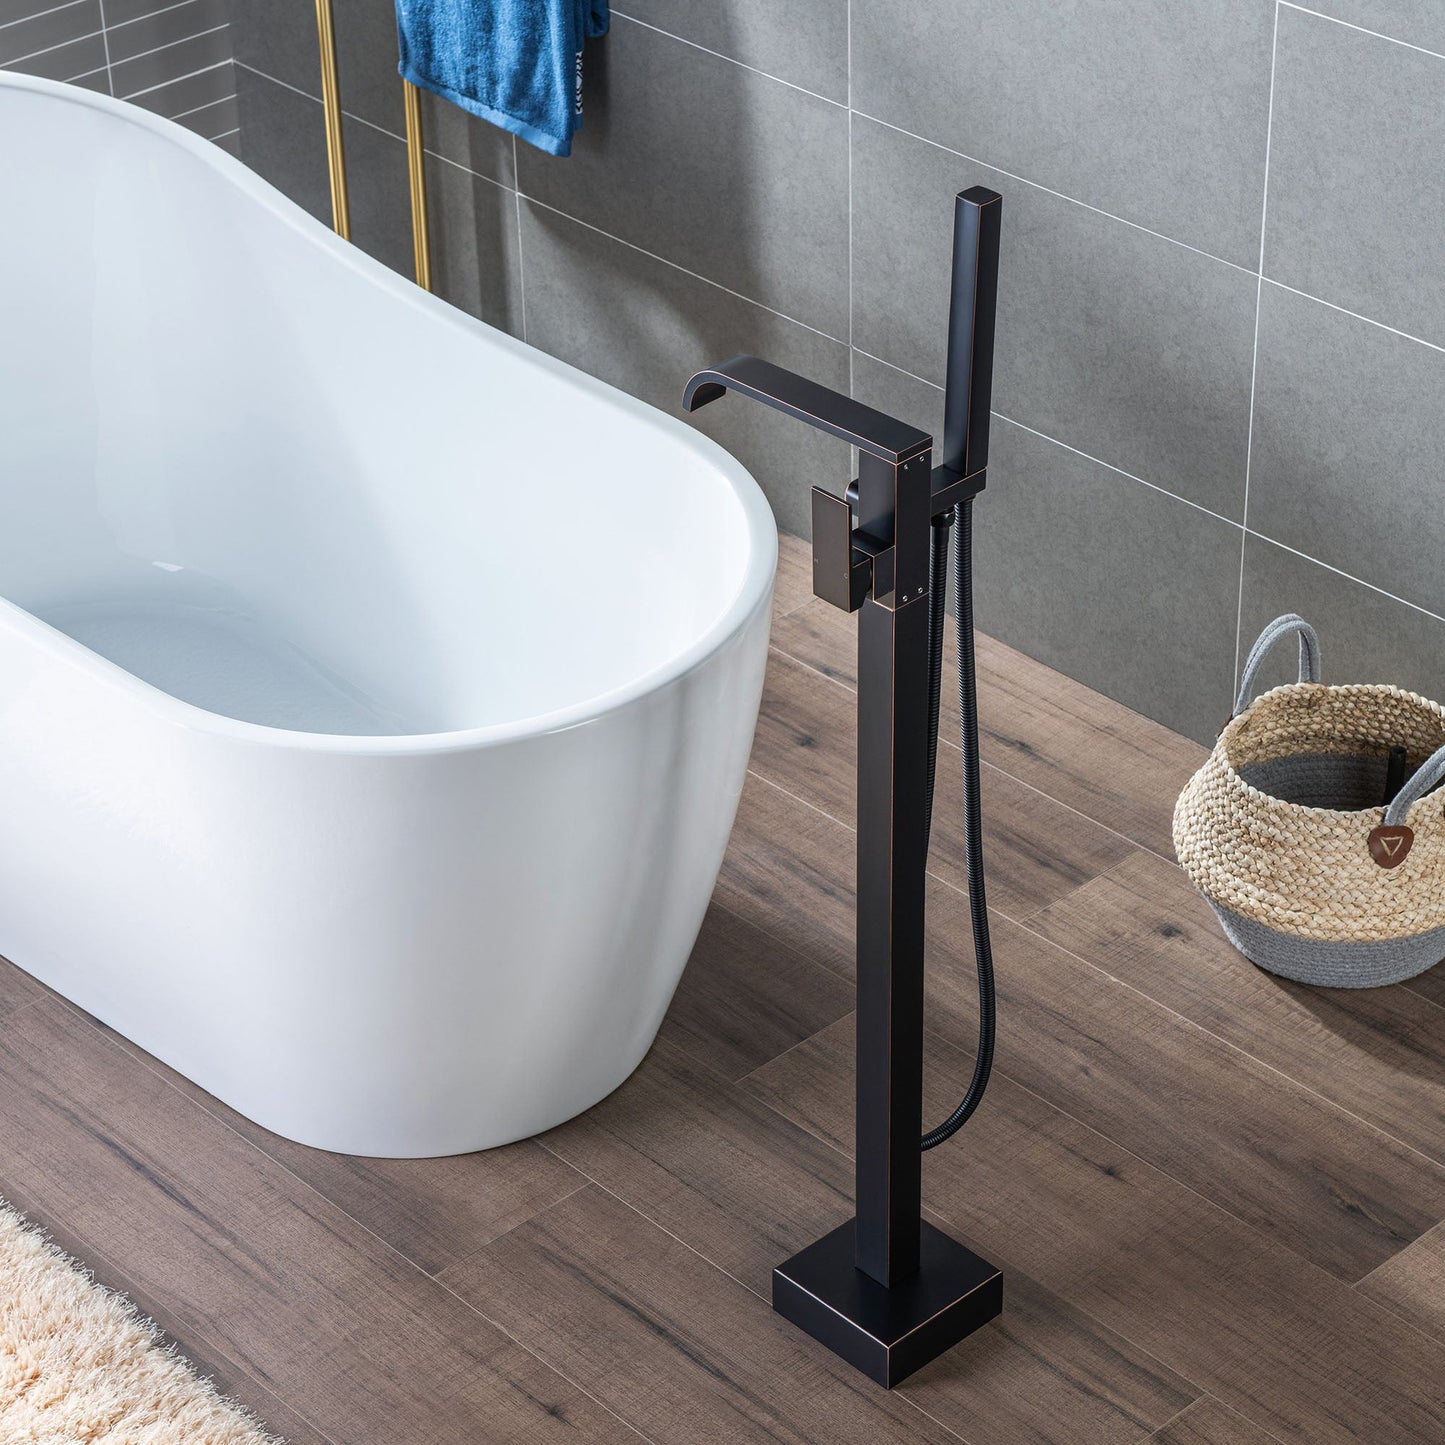 WoodBridge F0038ORB Oil Rubbed Bronze Contemporary Single Handle Floor Mount Freestanding Tub Filler Faucet With Square Hand Shower